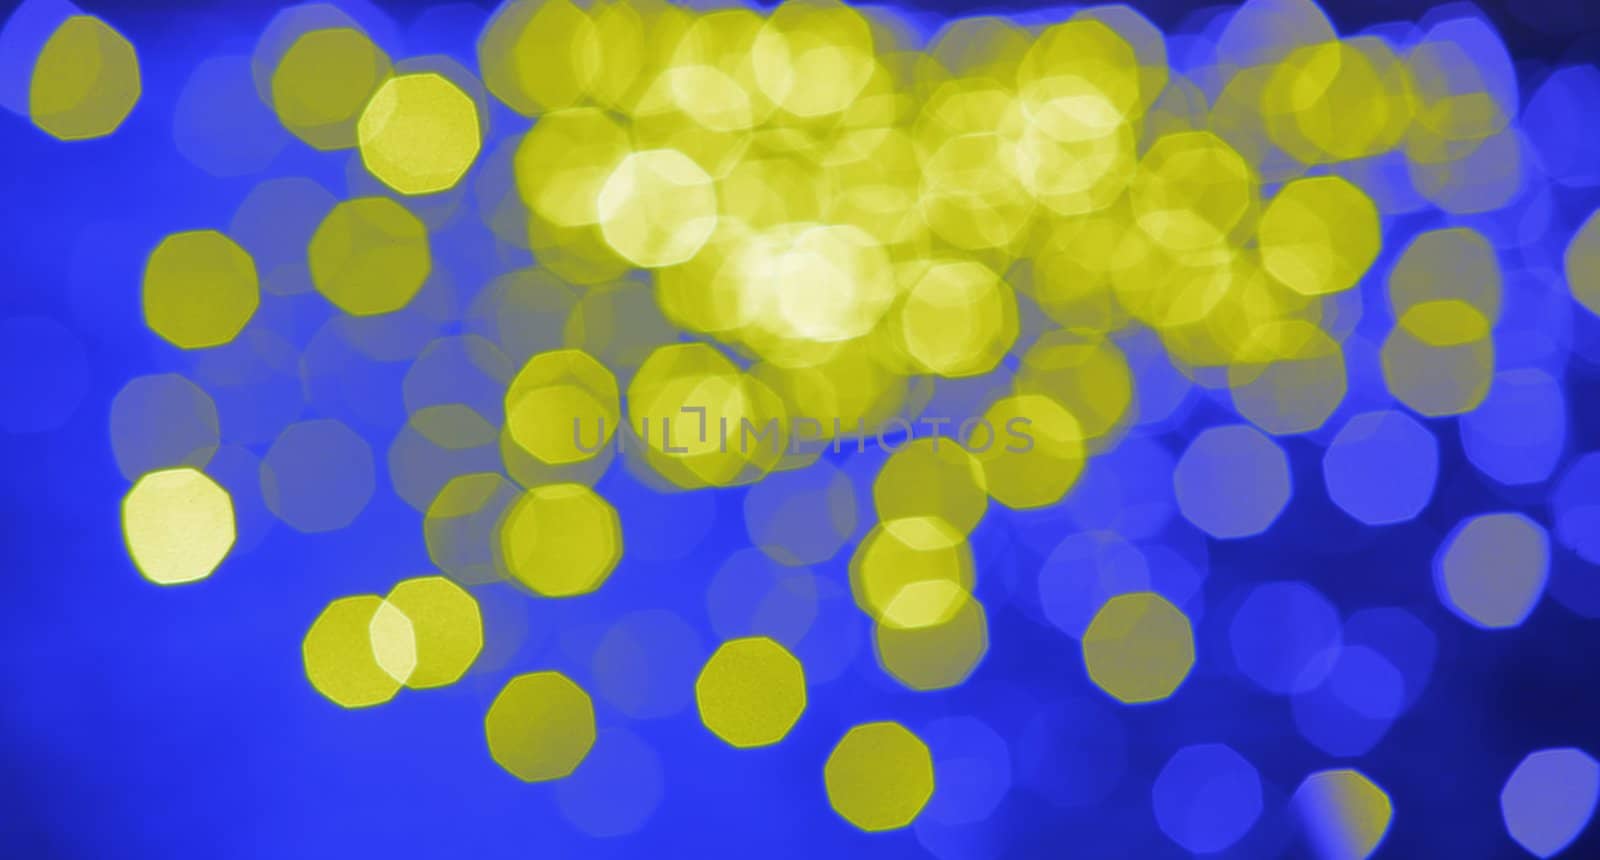 Abstraction, Yellow and Green Heel on Blue Background